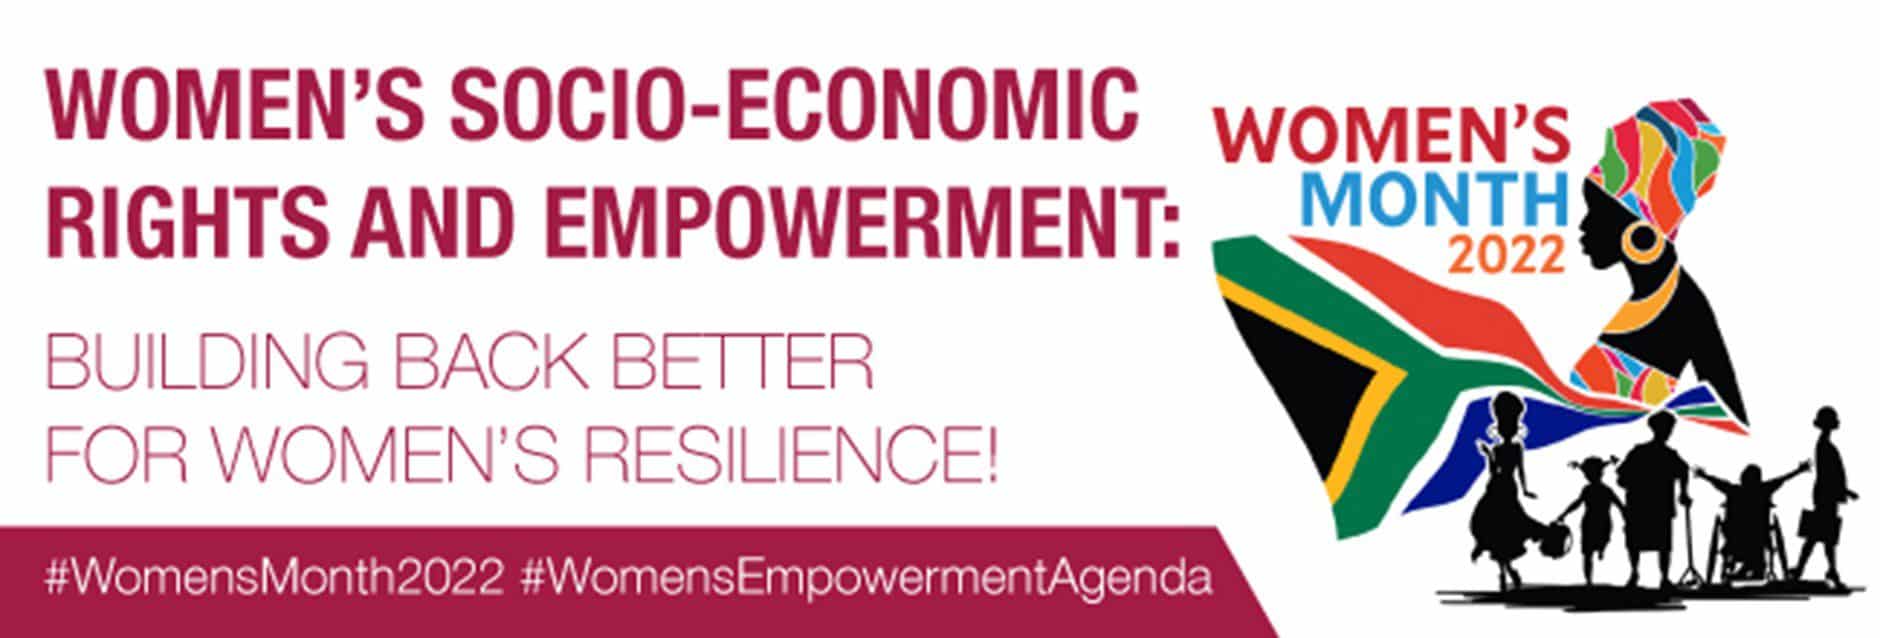 Women's Socio-economic rights and empowerment - Fab Consulting